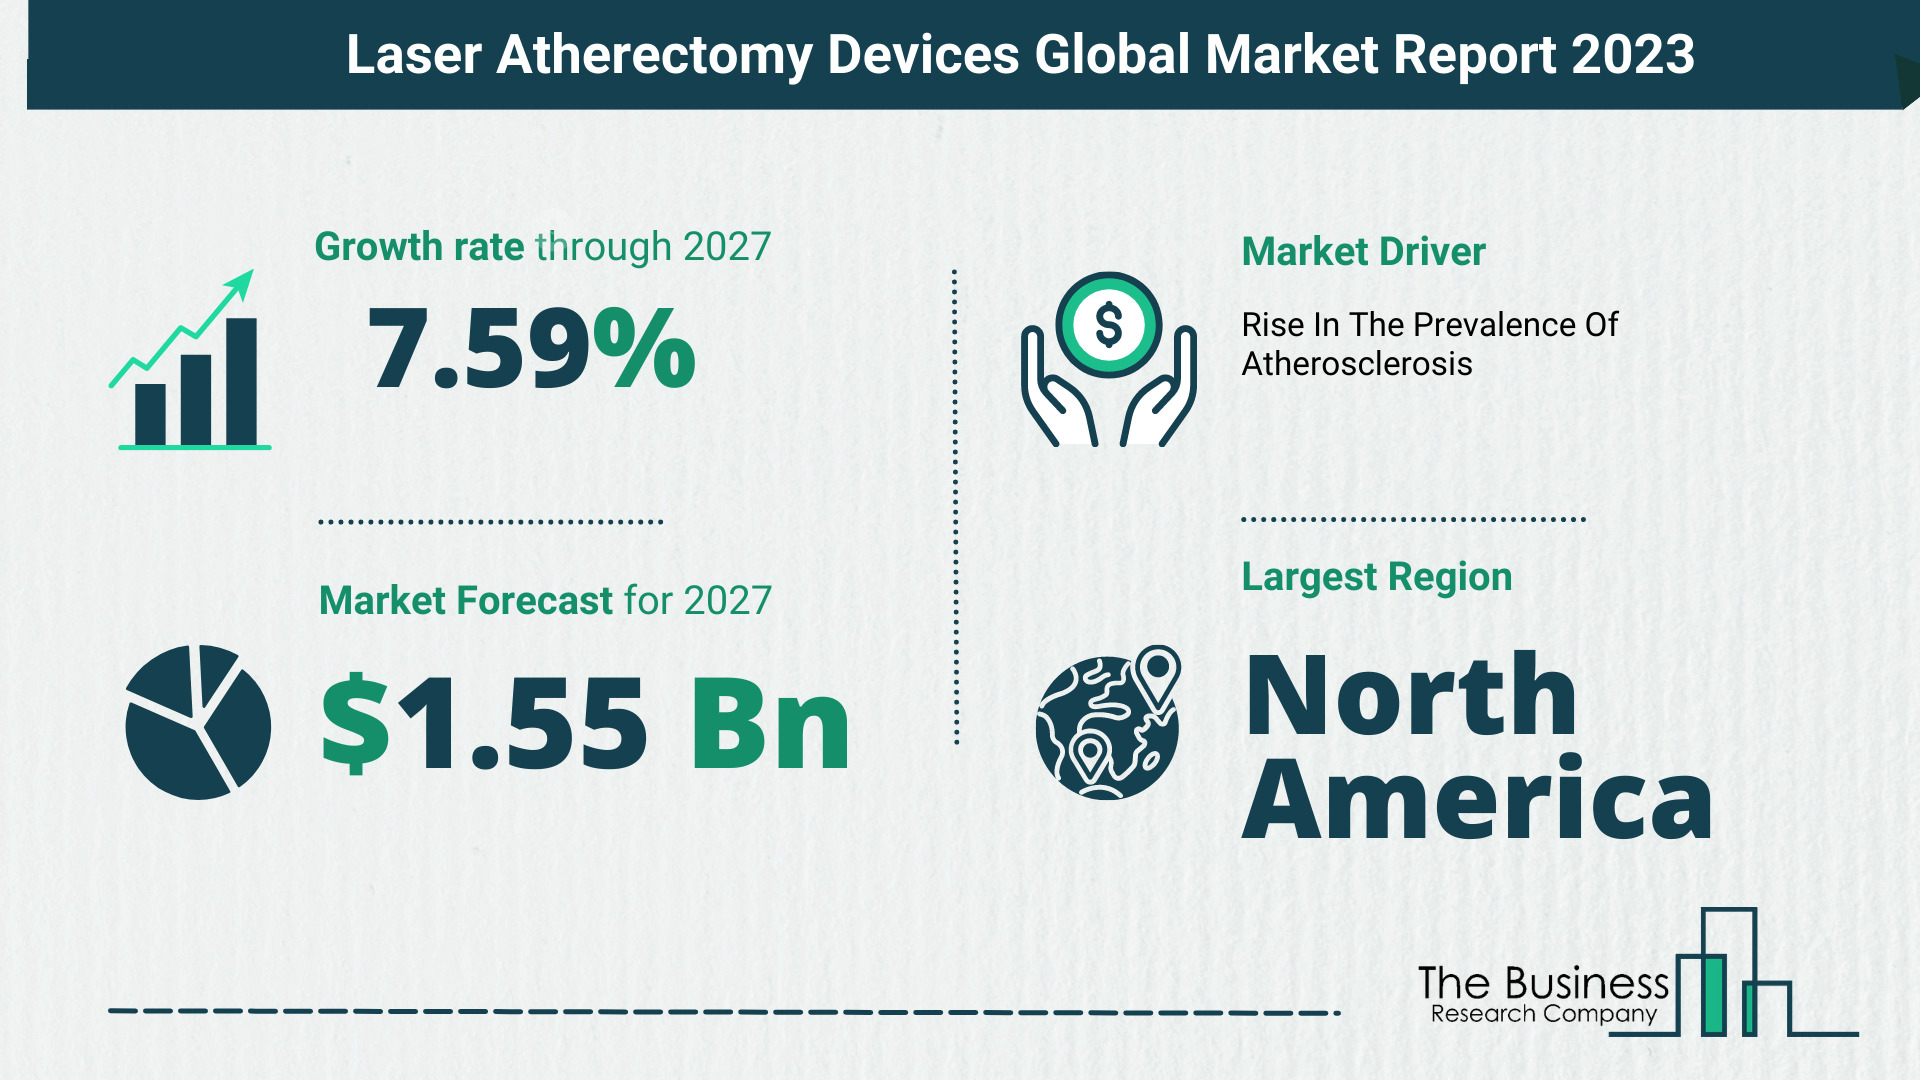 Global Laser Atherectomy Devices Market Opportunities And Strategies 2023